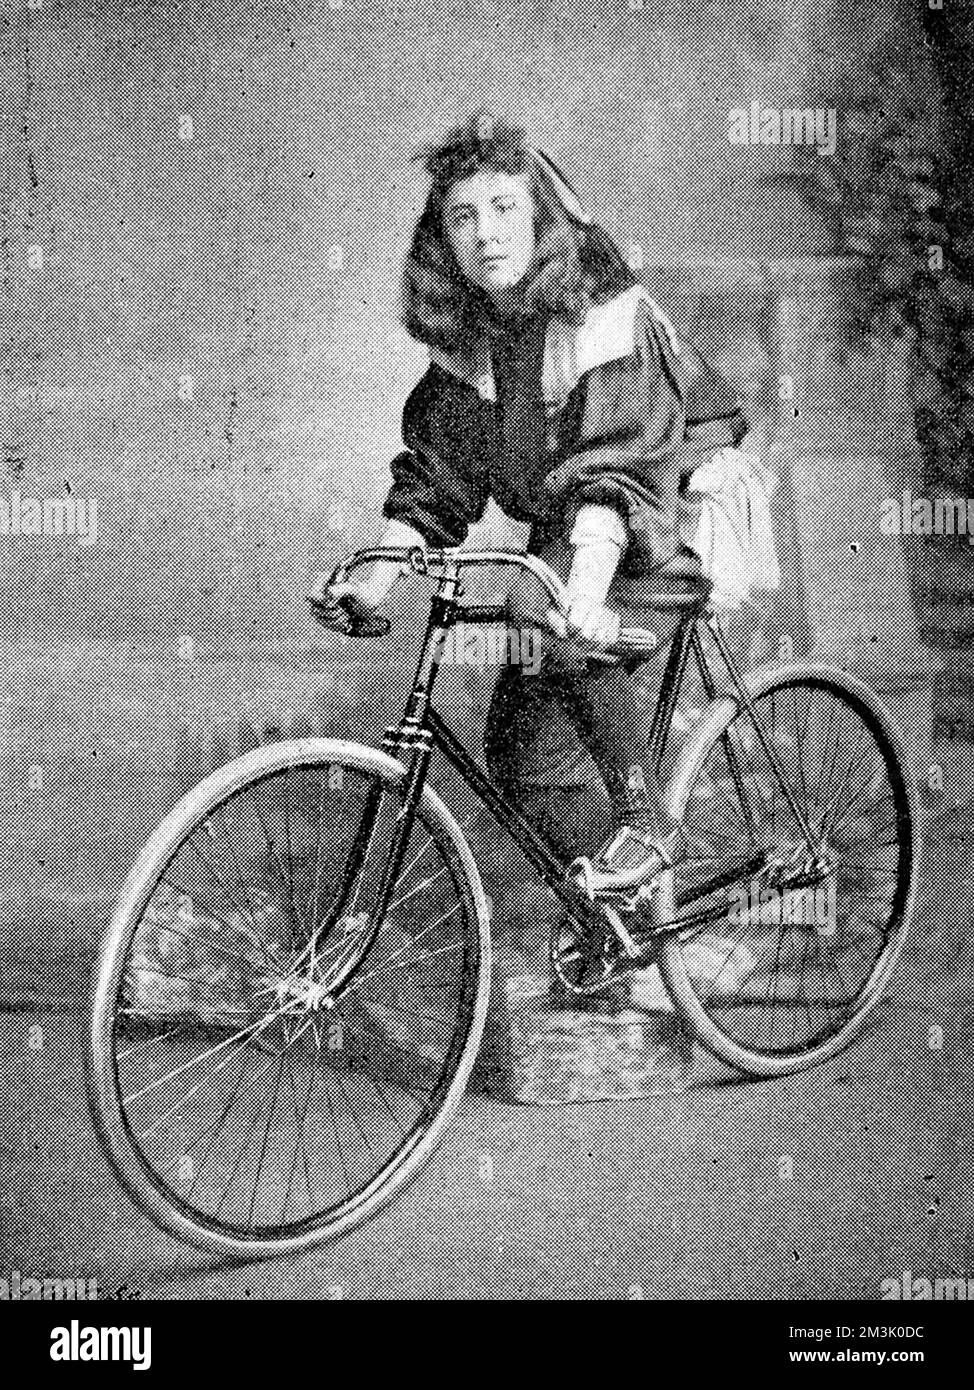 Nellie (Ellen) Hutton, the youngest member of the English team, at the first professional all female cycling tournament. Held at the Royal Aquarium, Westminster, London, a major entertainment and sports venue, at the time. It was a Six day event between England and France on a huge temporary wooden velodrome in the main hall. The competition was a great success, drawing in crowds with England winning. Stock Photo